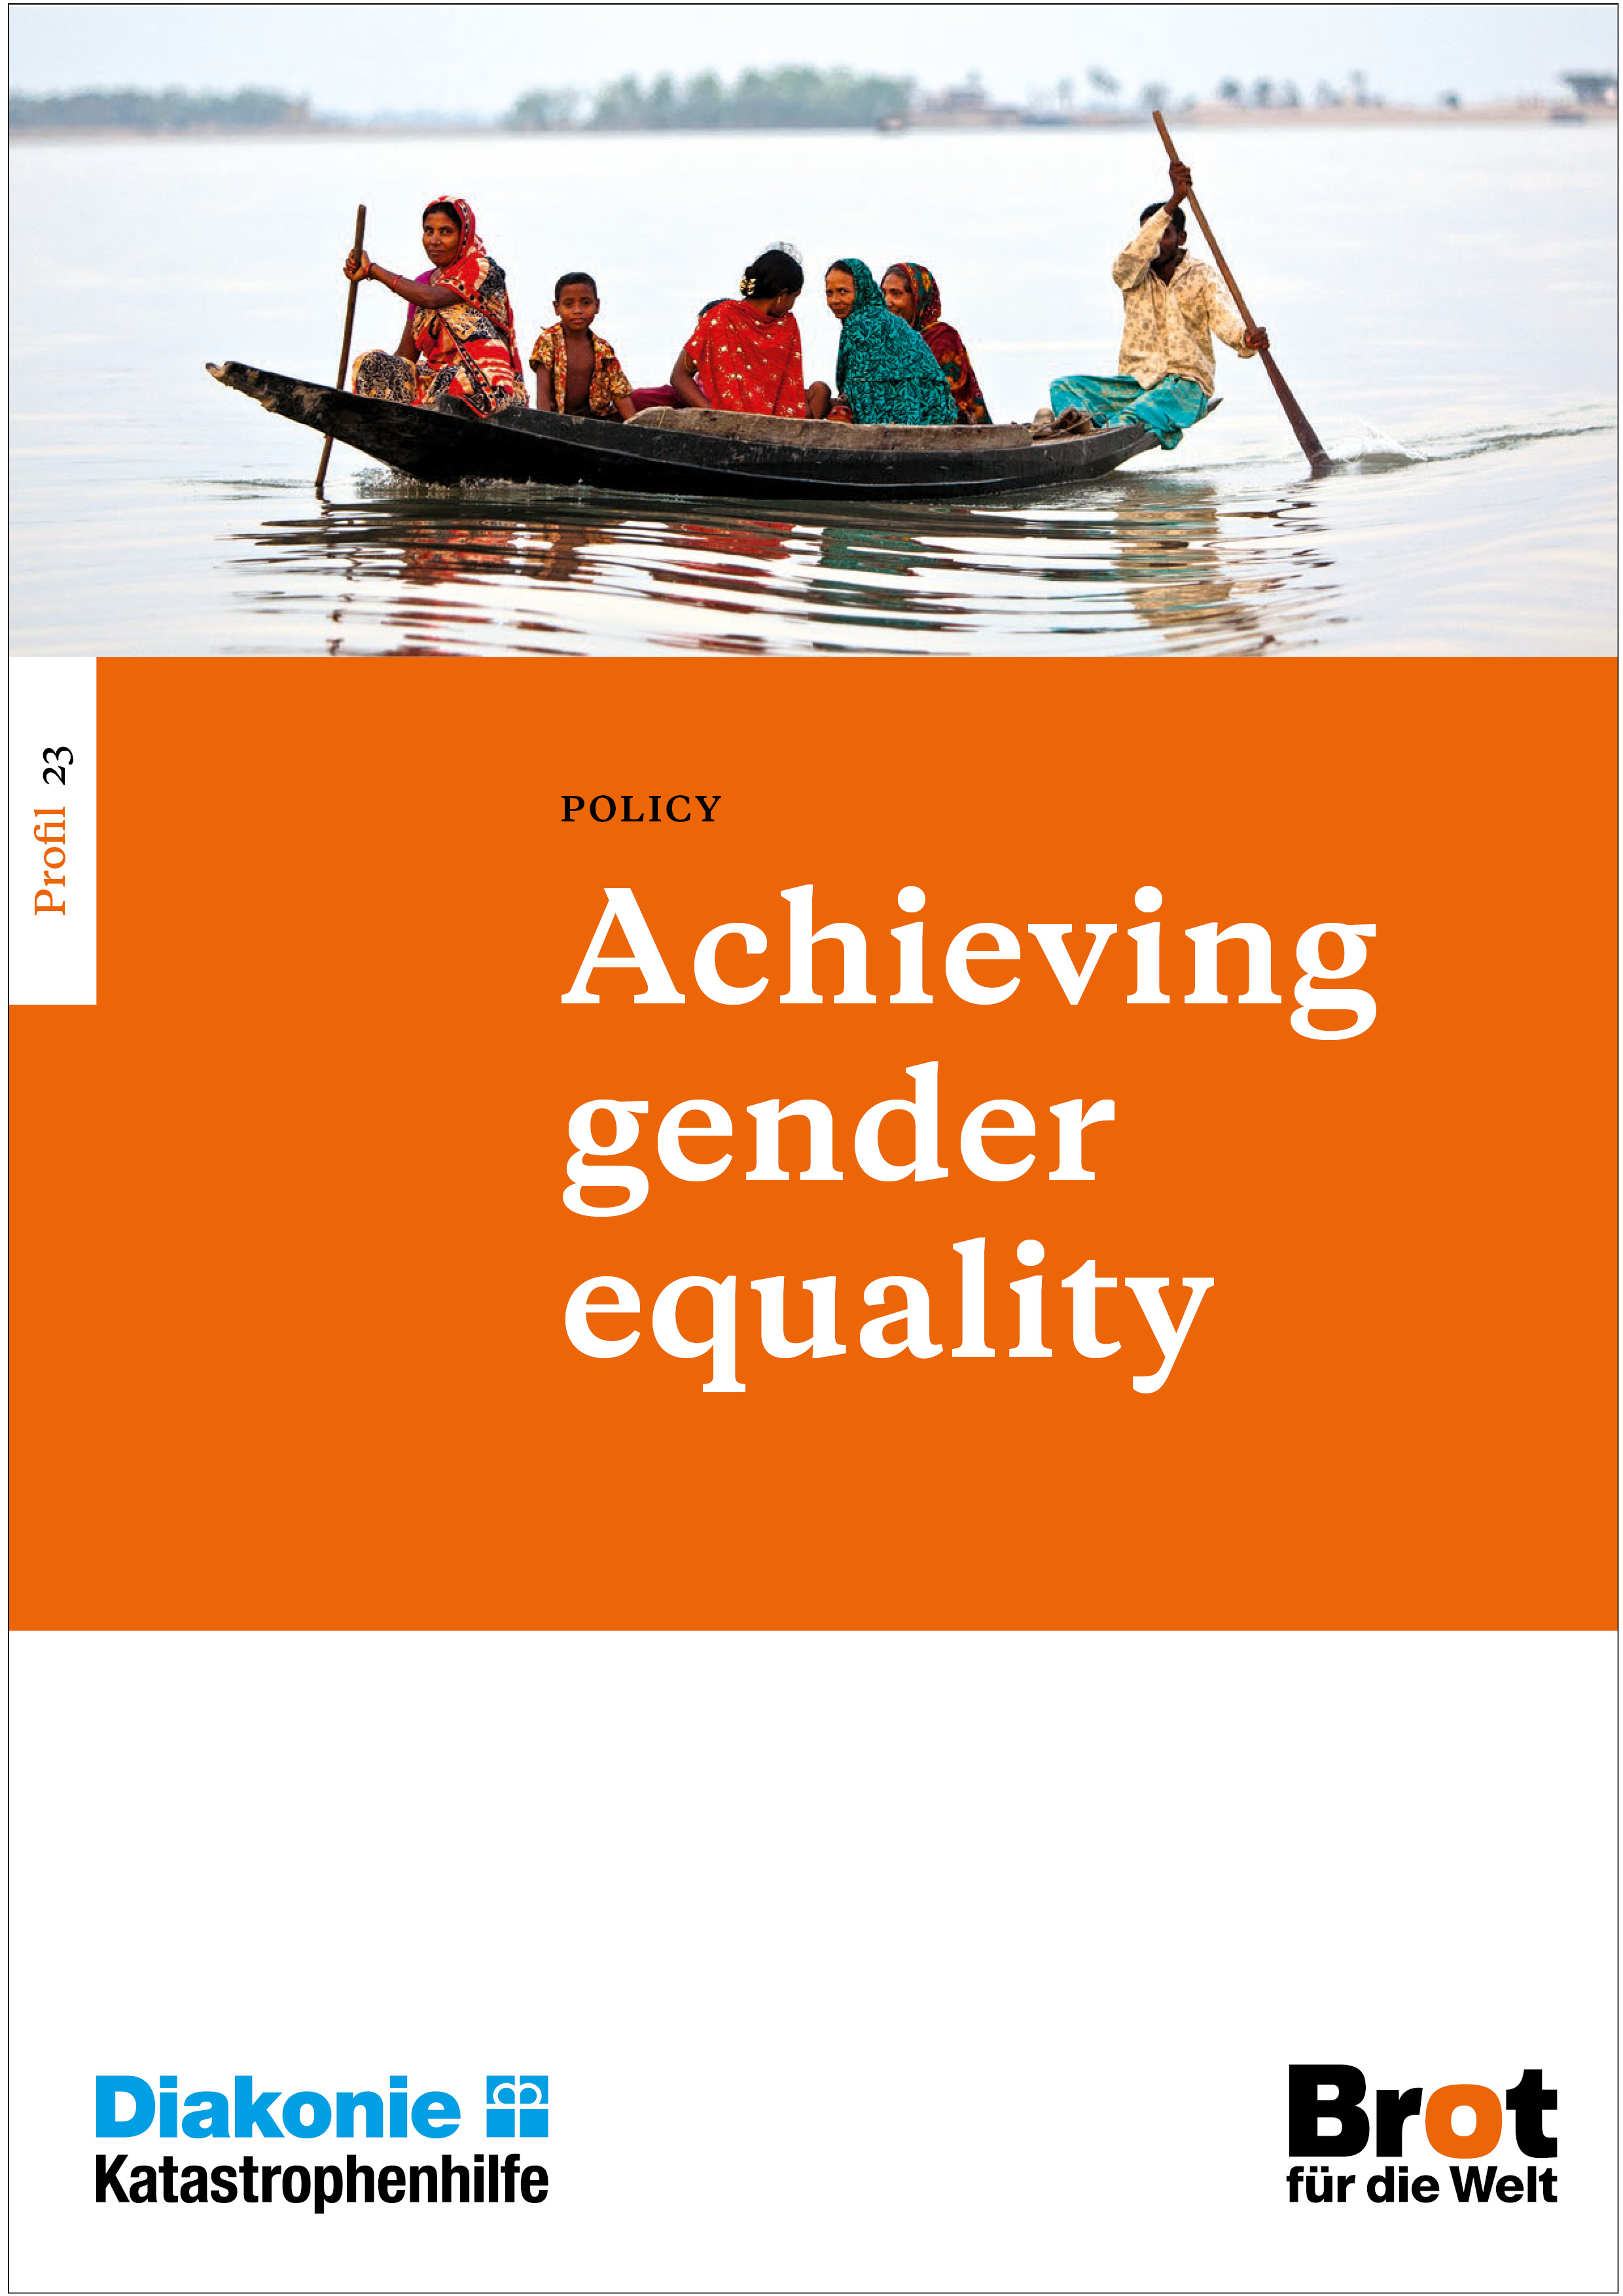 Profile 23: Achieving gender equality